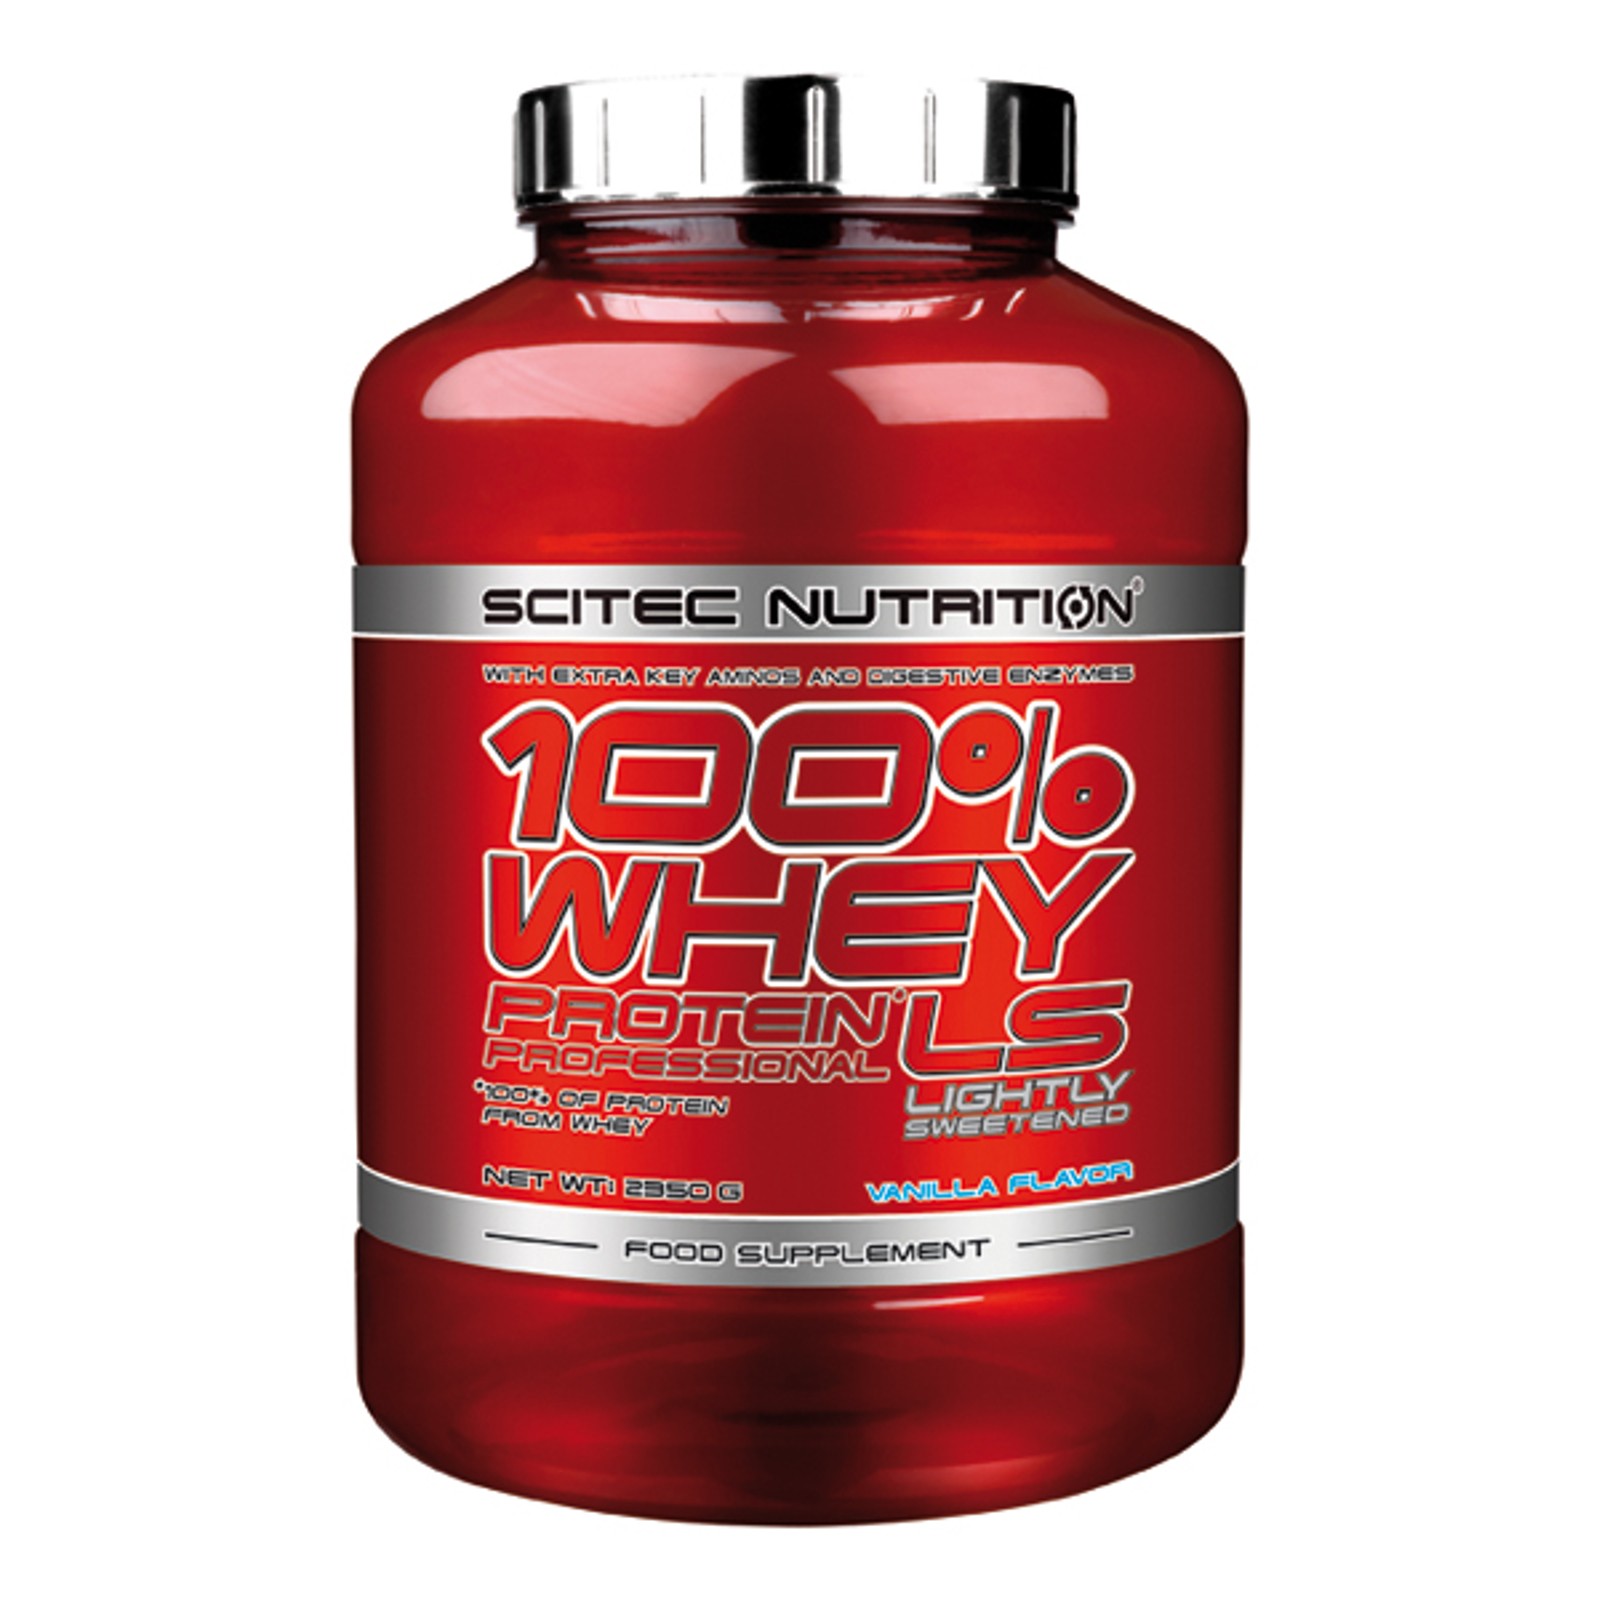 Scitec Protein Professional Whey Best Buy At Sport Tiedje